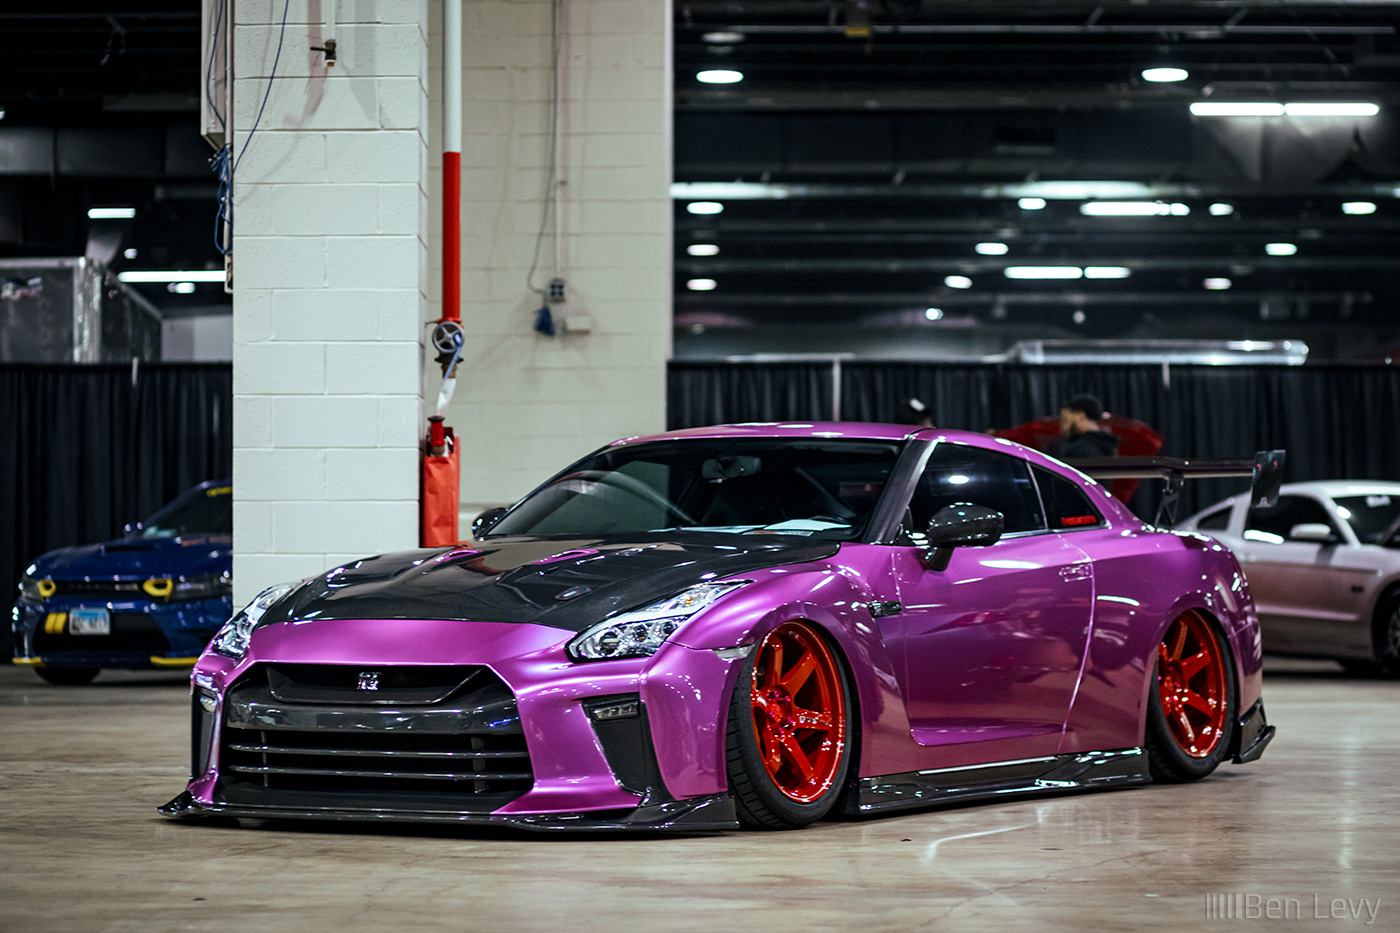 Bagged R35 GT-R with Purple Wrap